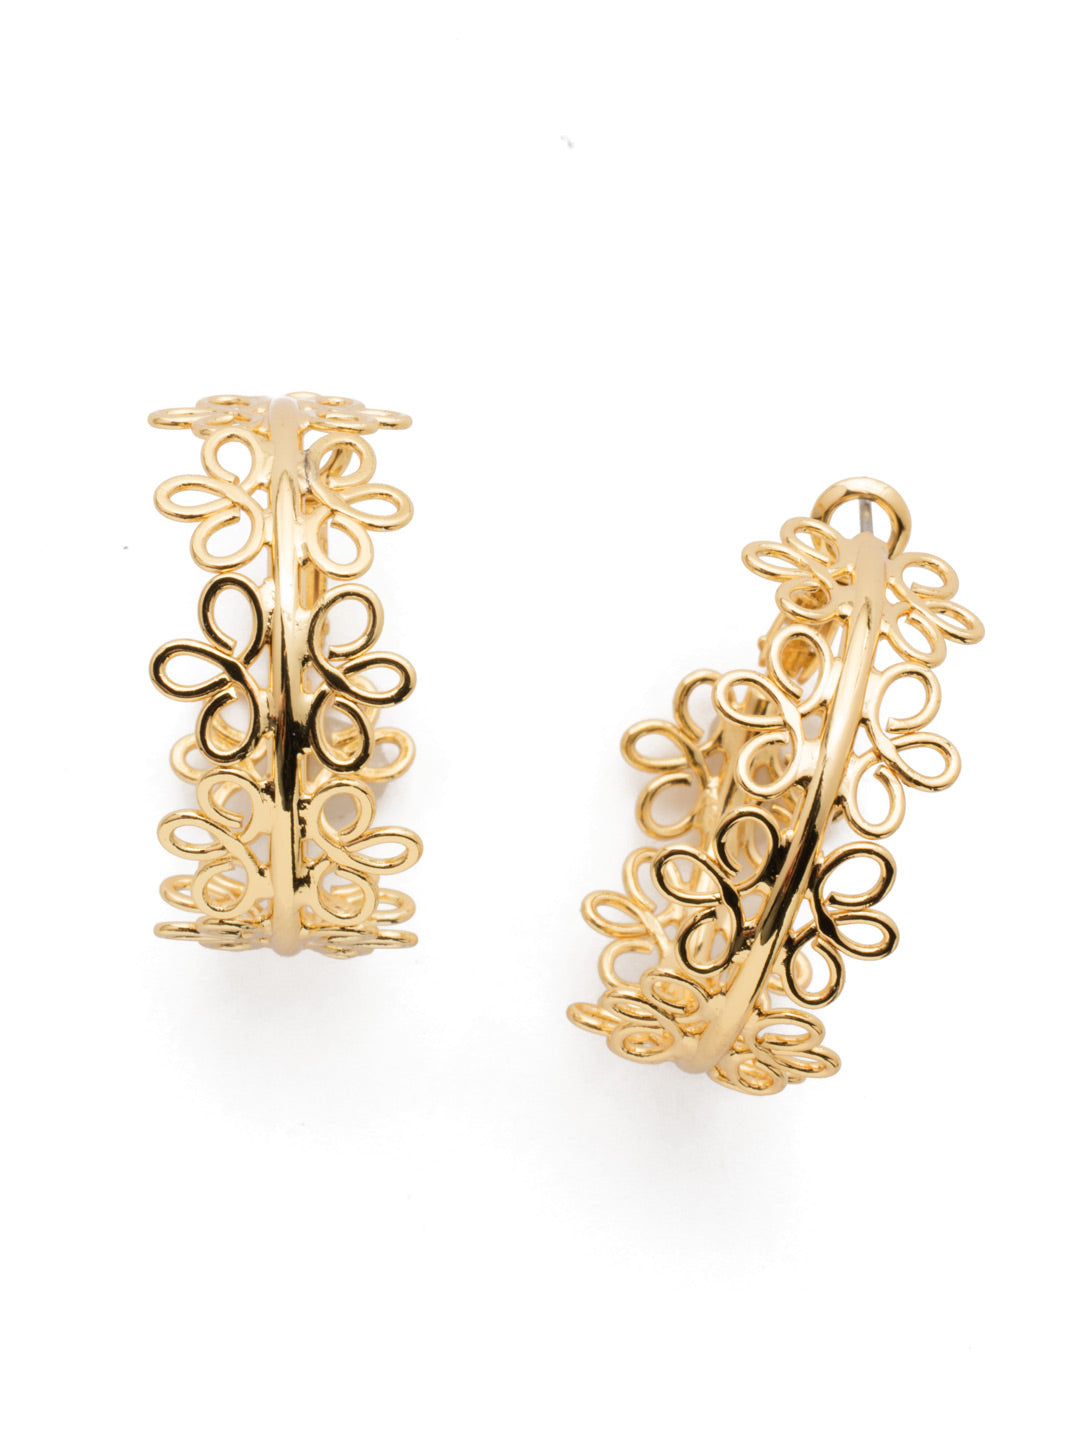 Bellarose Hoop Earrings - 4EES94BGCRY - <p>Our Bellarose Hoop Earrings are simply beautiful. Delicate, hand-soldered metal detail is front-and-center in this pair you'll cherish for years to come. From Sorrelli's Crystal collection in our Bright Gold-tone finish.</p>